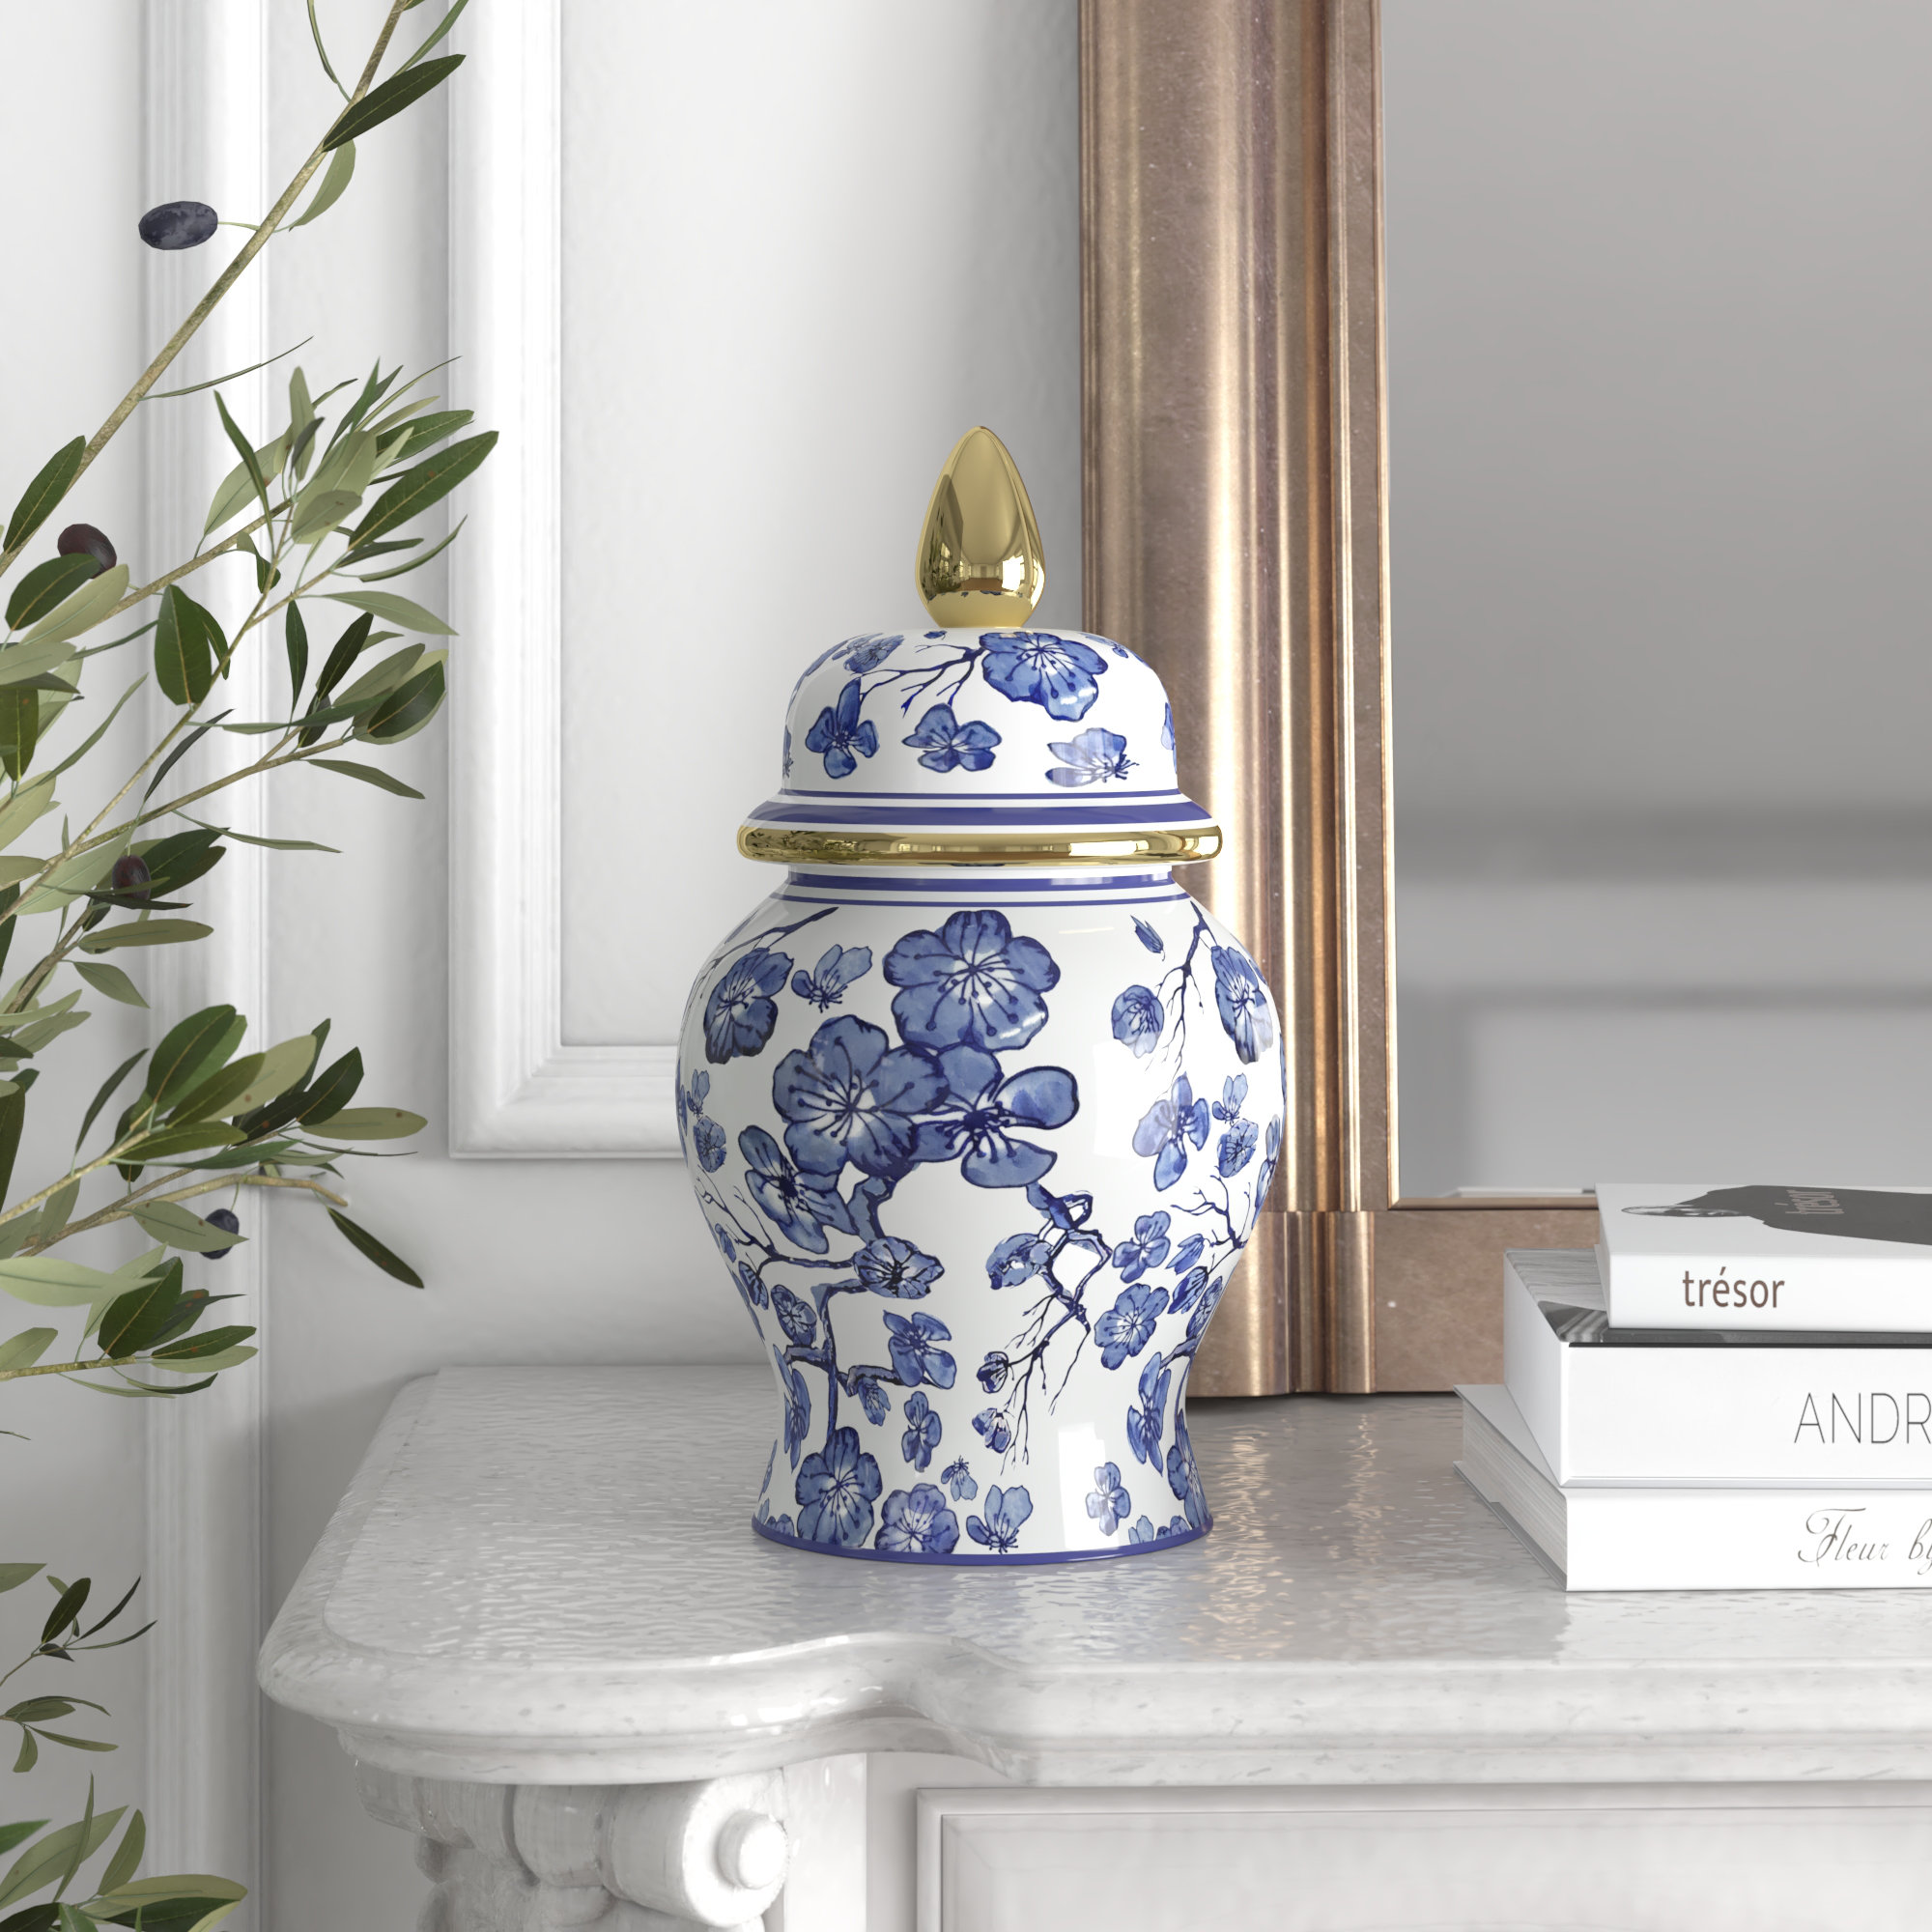 Kelly Clarkson Home Nina 14 Ceramic Temple Jar with Lid - Contemporary  Vintage Style Blue and White Chinoiserie Floral Design & Reviews